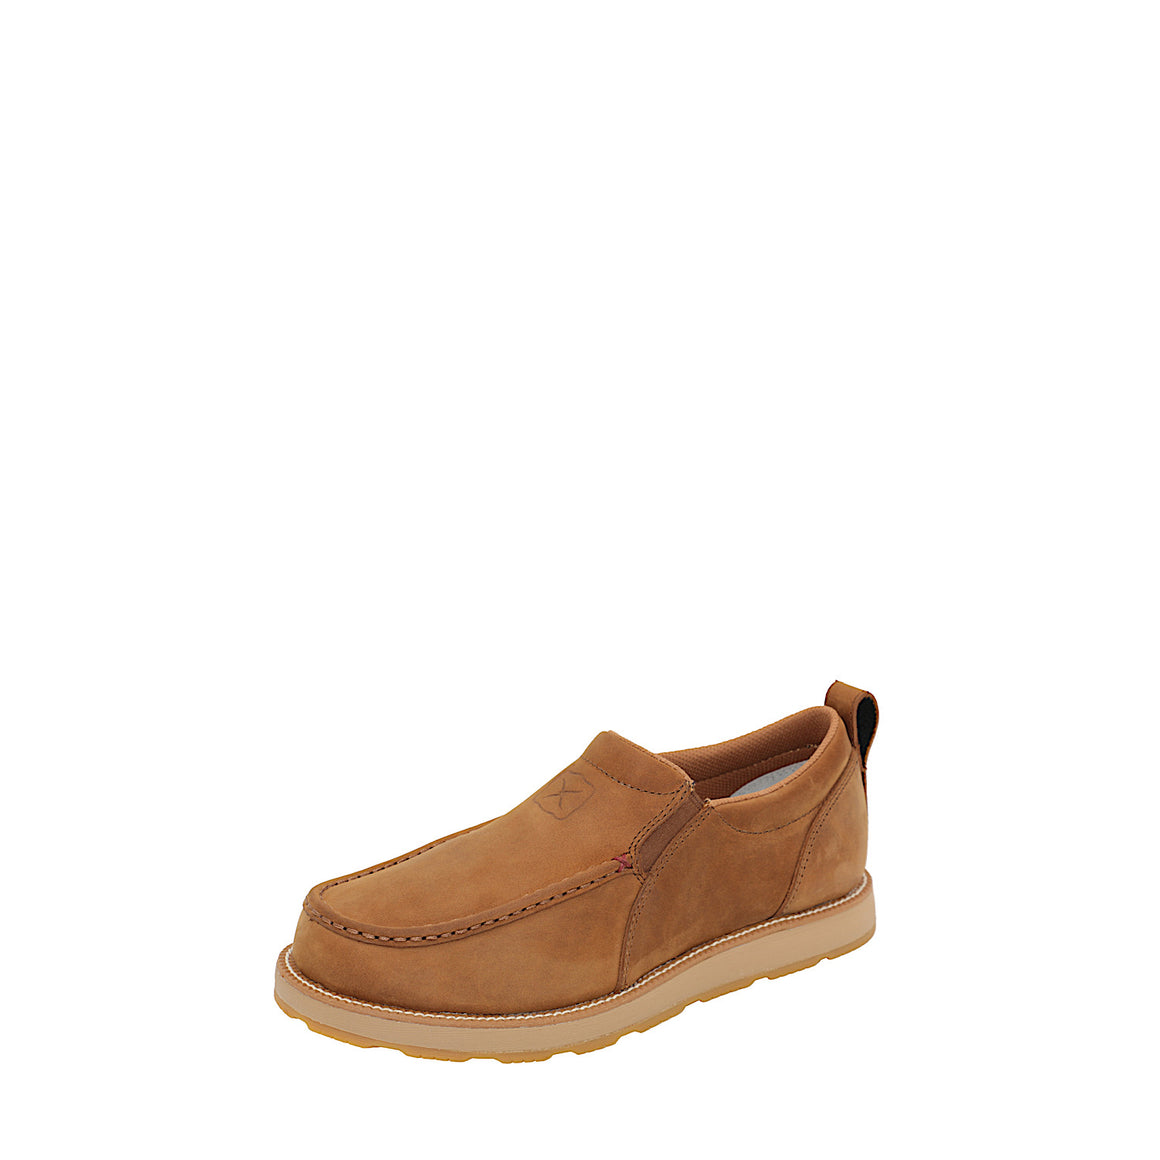 Twisted X Mens Cellstretch Wedge Slip On - Lion Tan